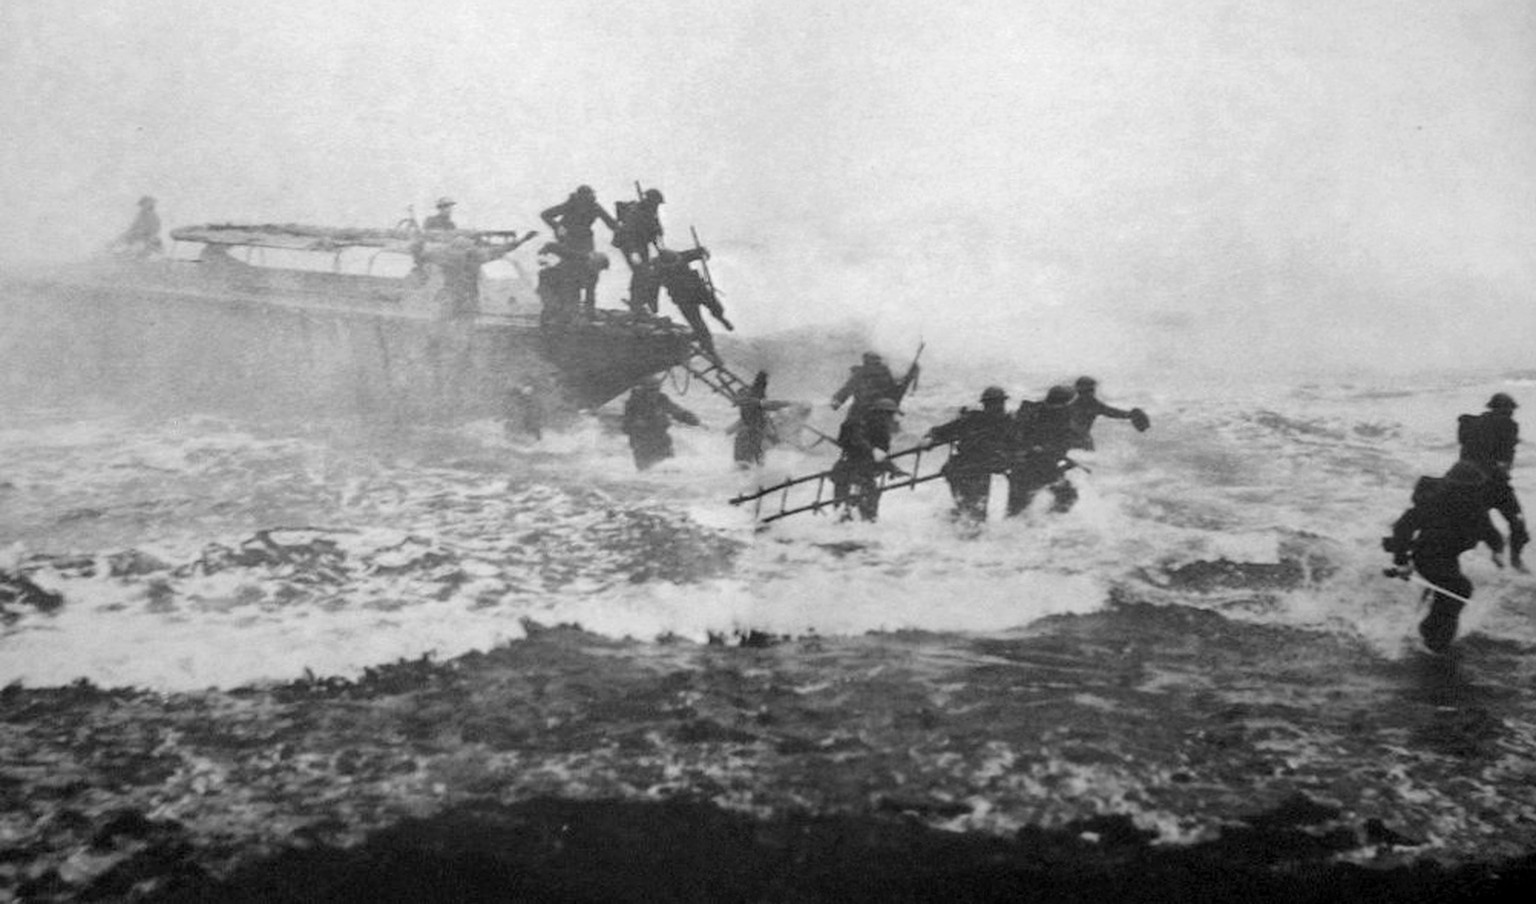 https://commons.wikimedia.org/wiki/Category:Jack_Churchill?uselang=de#/media/File:Jack_Churchill_leading_training_charge_with_sword.jpg